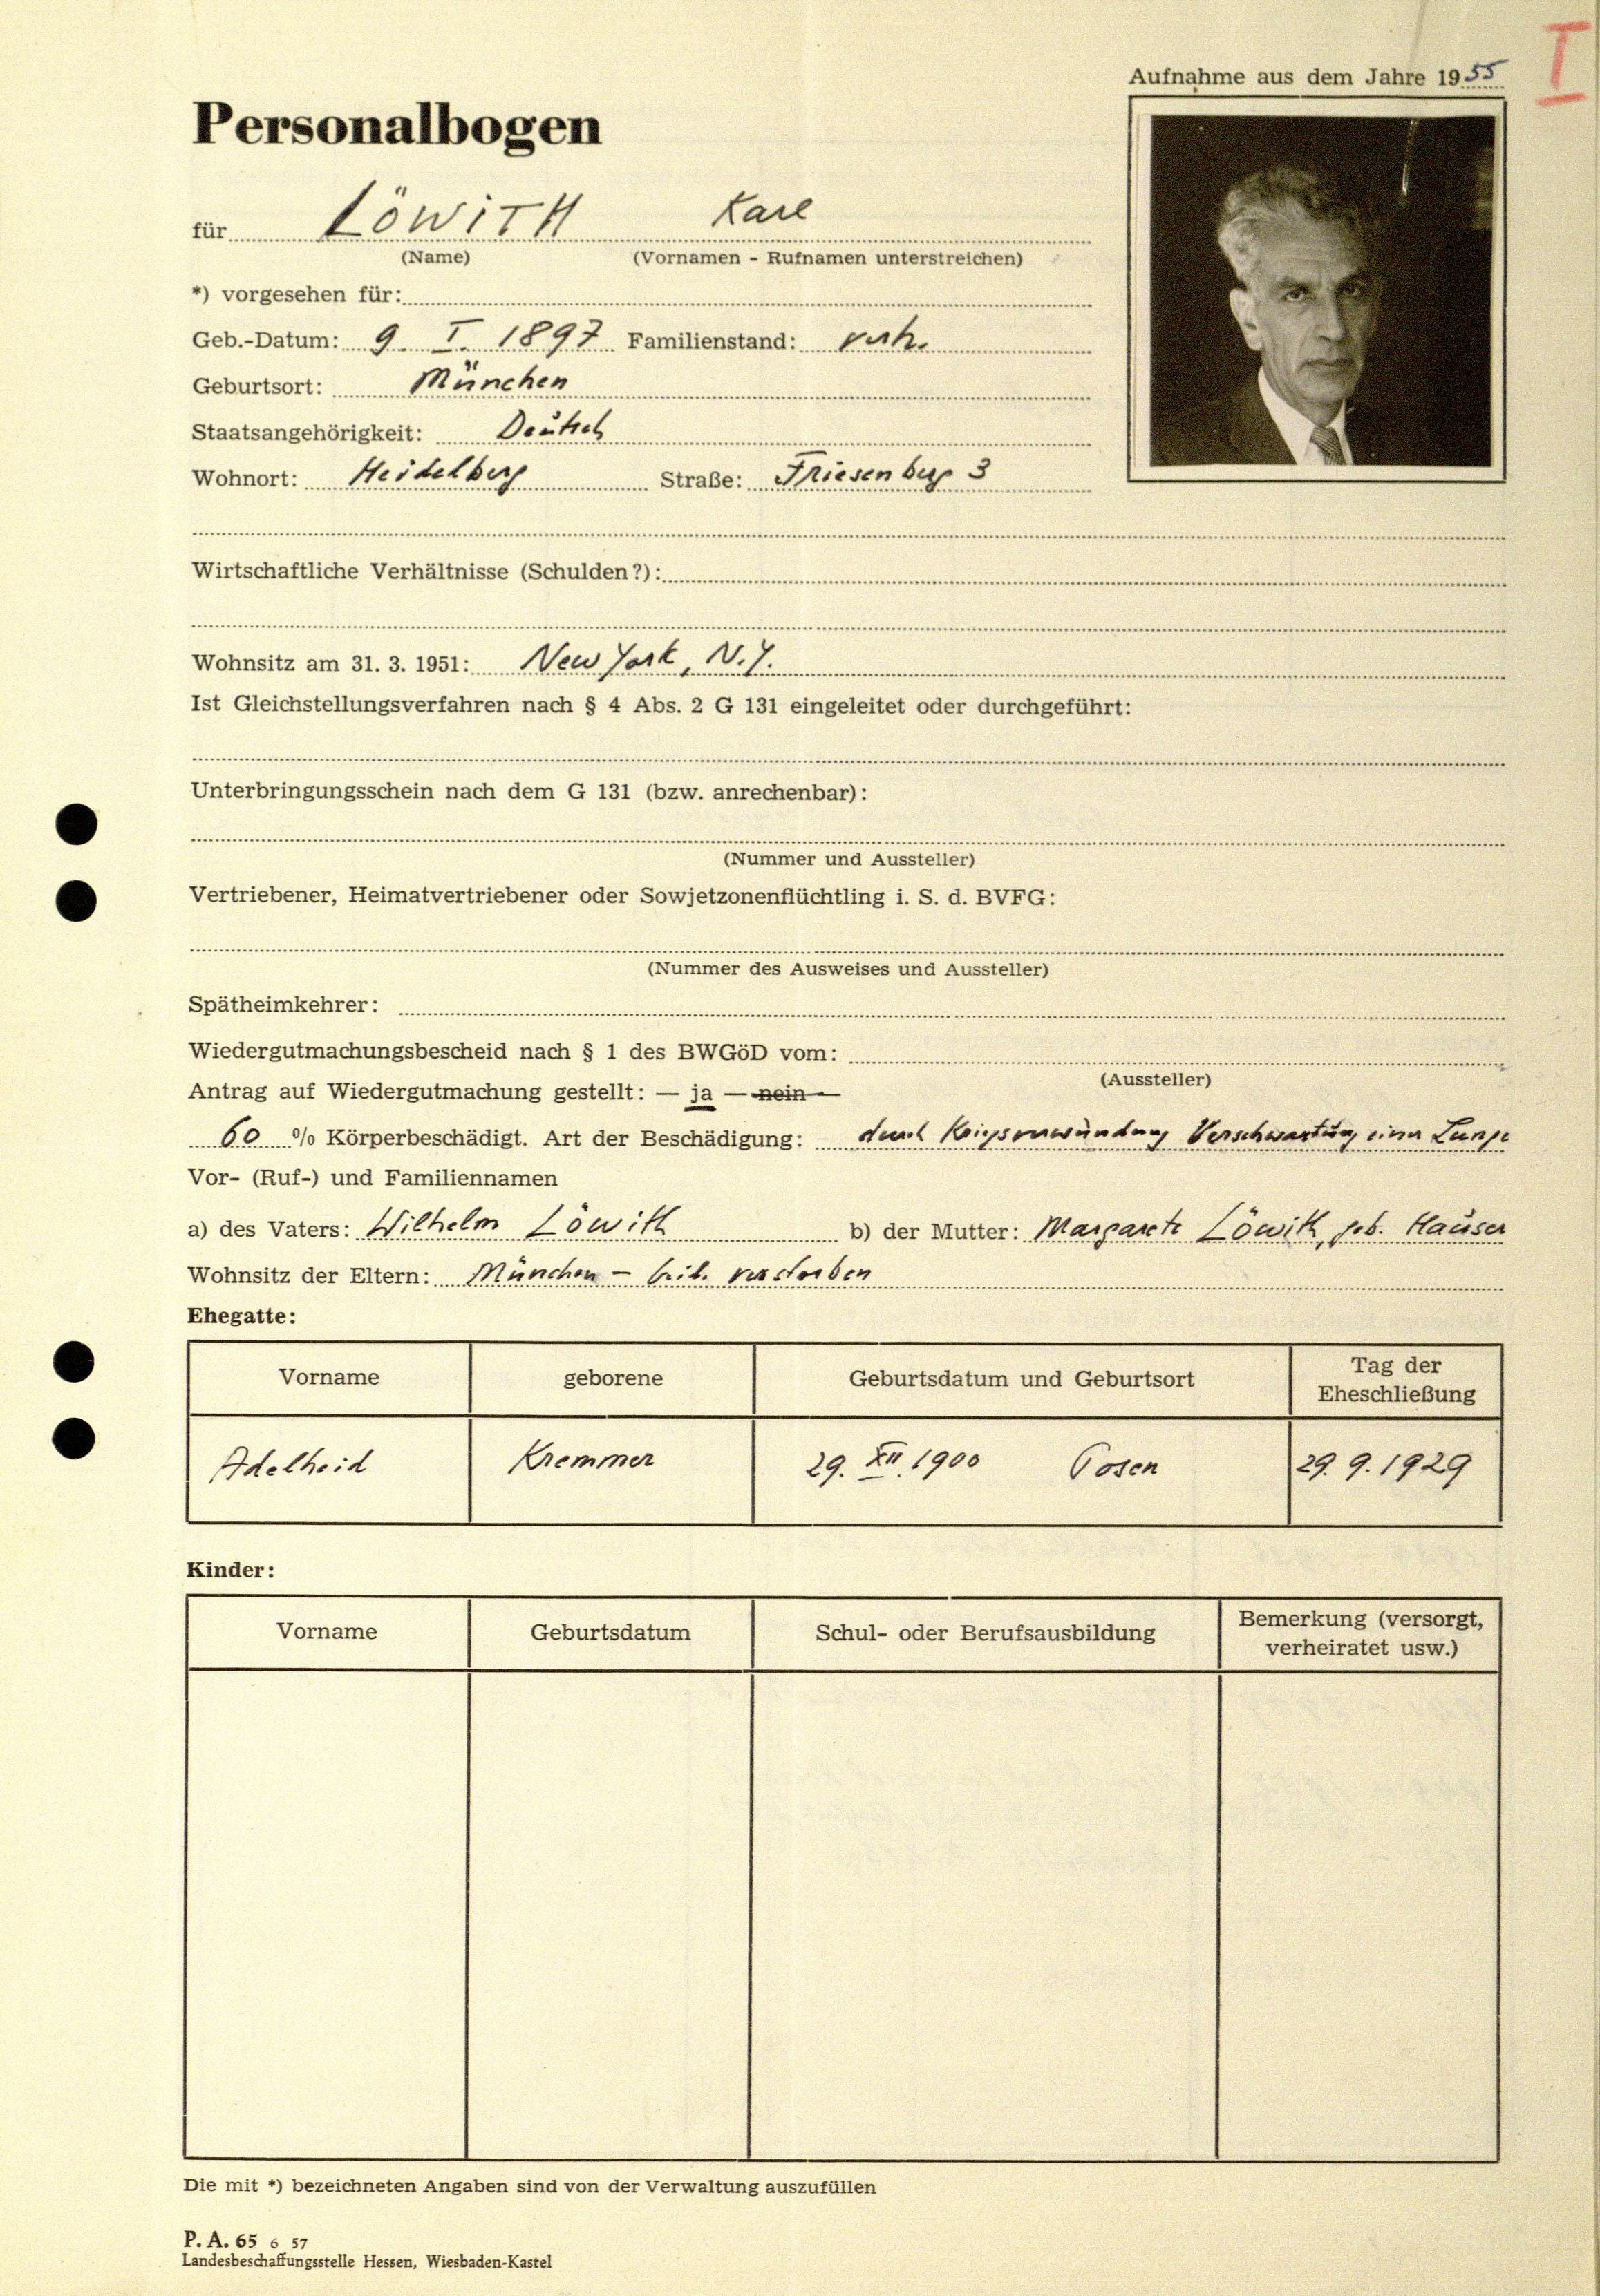 Löwith's personal data form. By permission of Universitätsarchiv Marburg